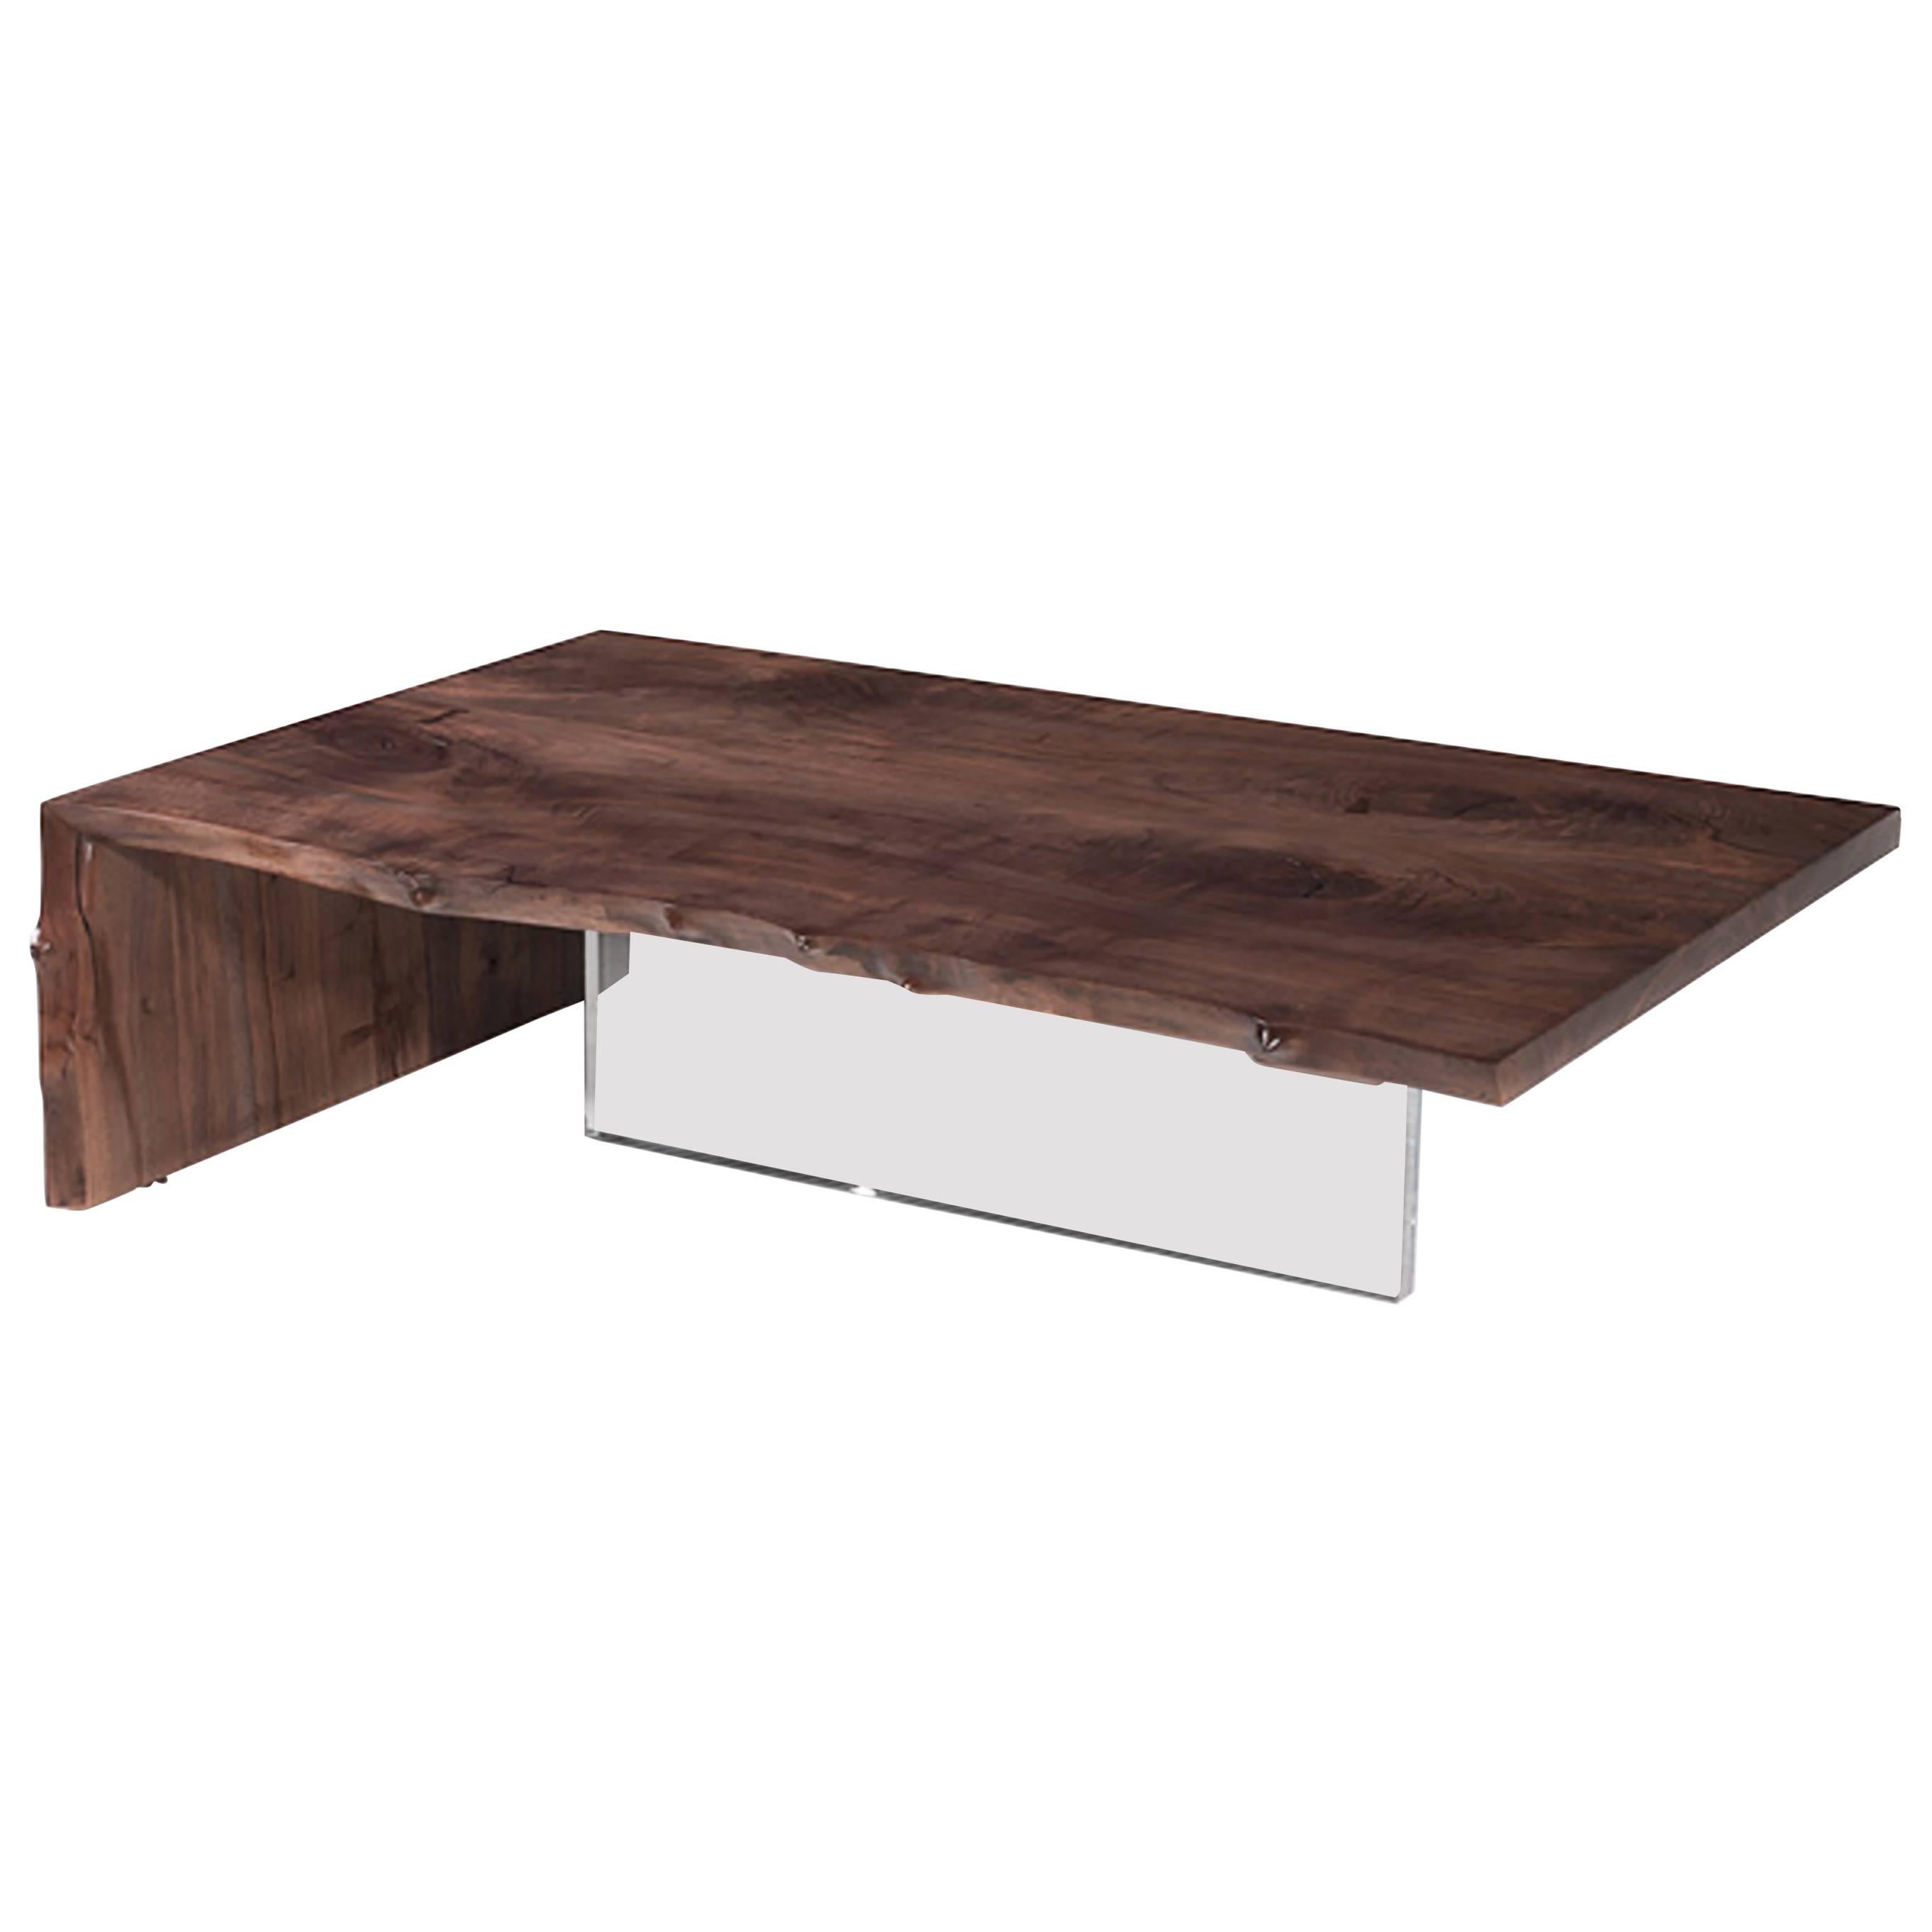 Walnut and Plexi Base Waterfall Edge Coffee Table For Sale